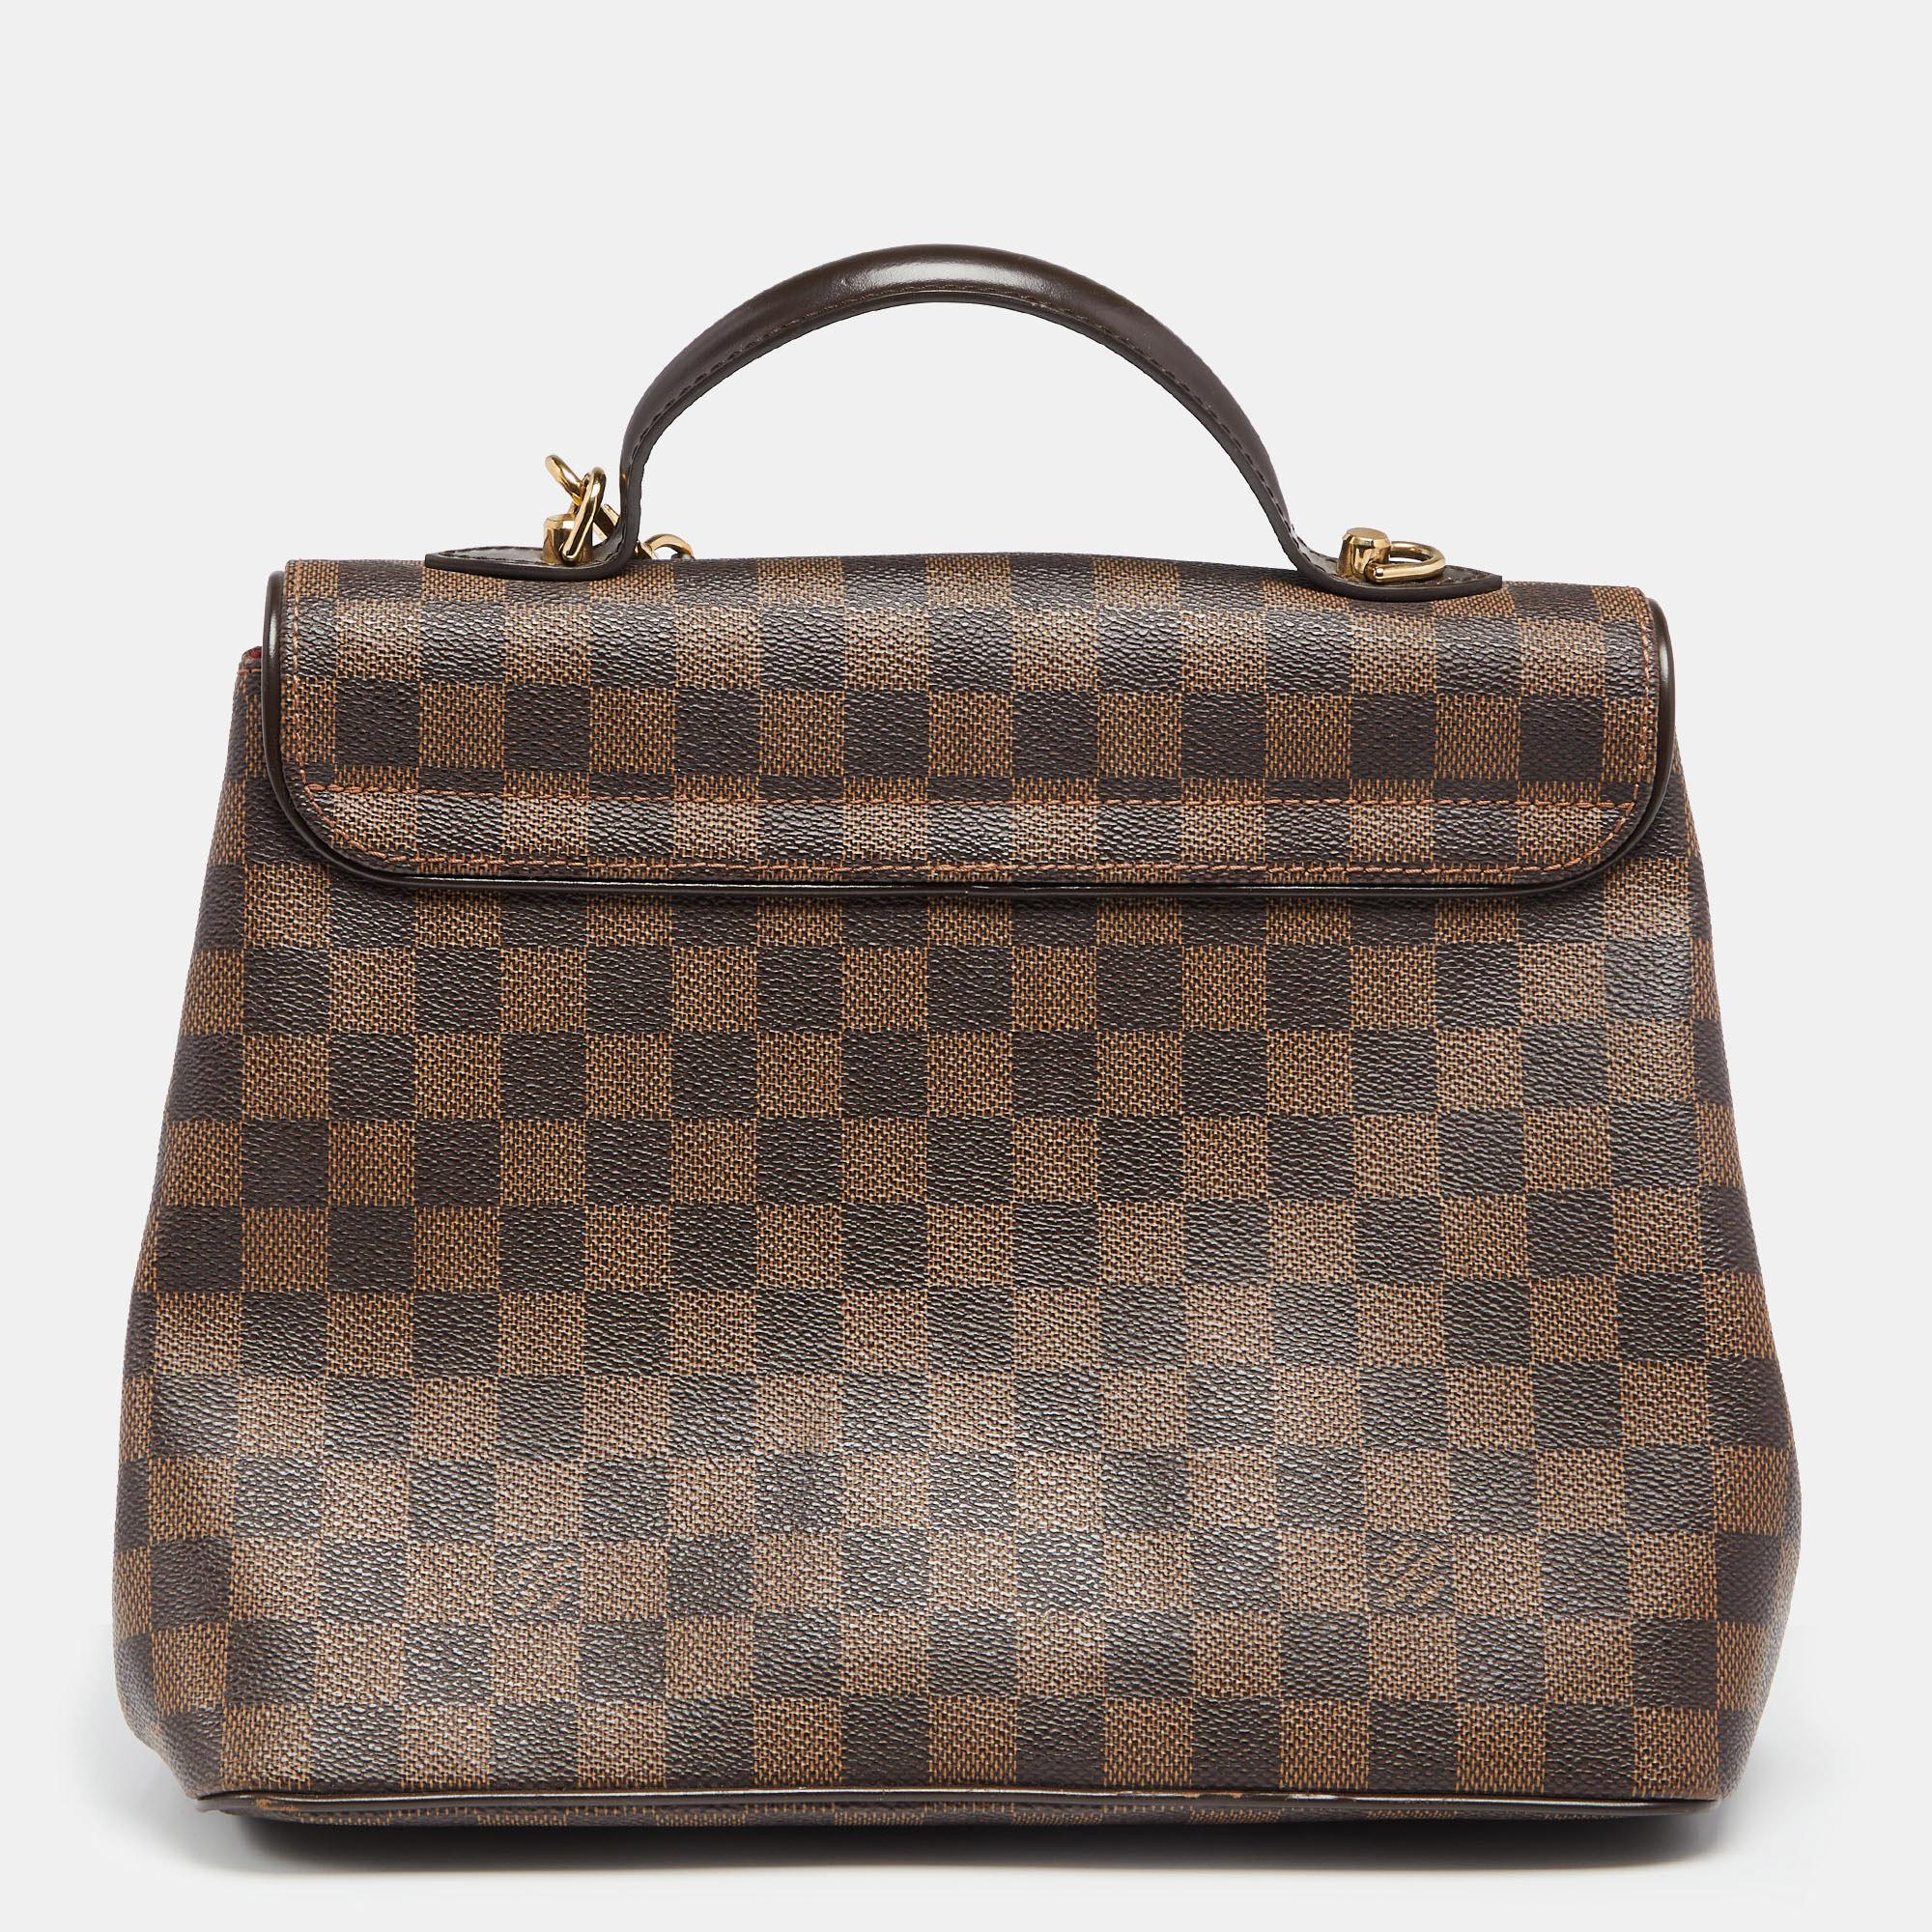 Louis Vuitton is trusted to mark a striking statement in the world of fashion with its phenomenal pieces. This Bergamo bag surely meets your expectations. This creation has been beautifully crafted from Damier Ebene and styled with a flap that has a